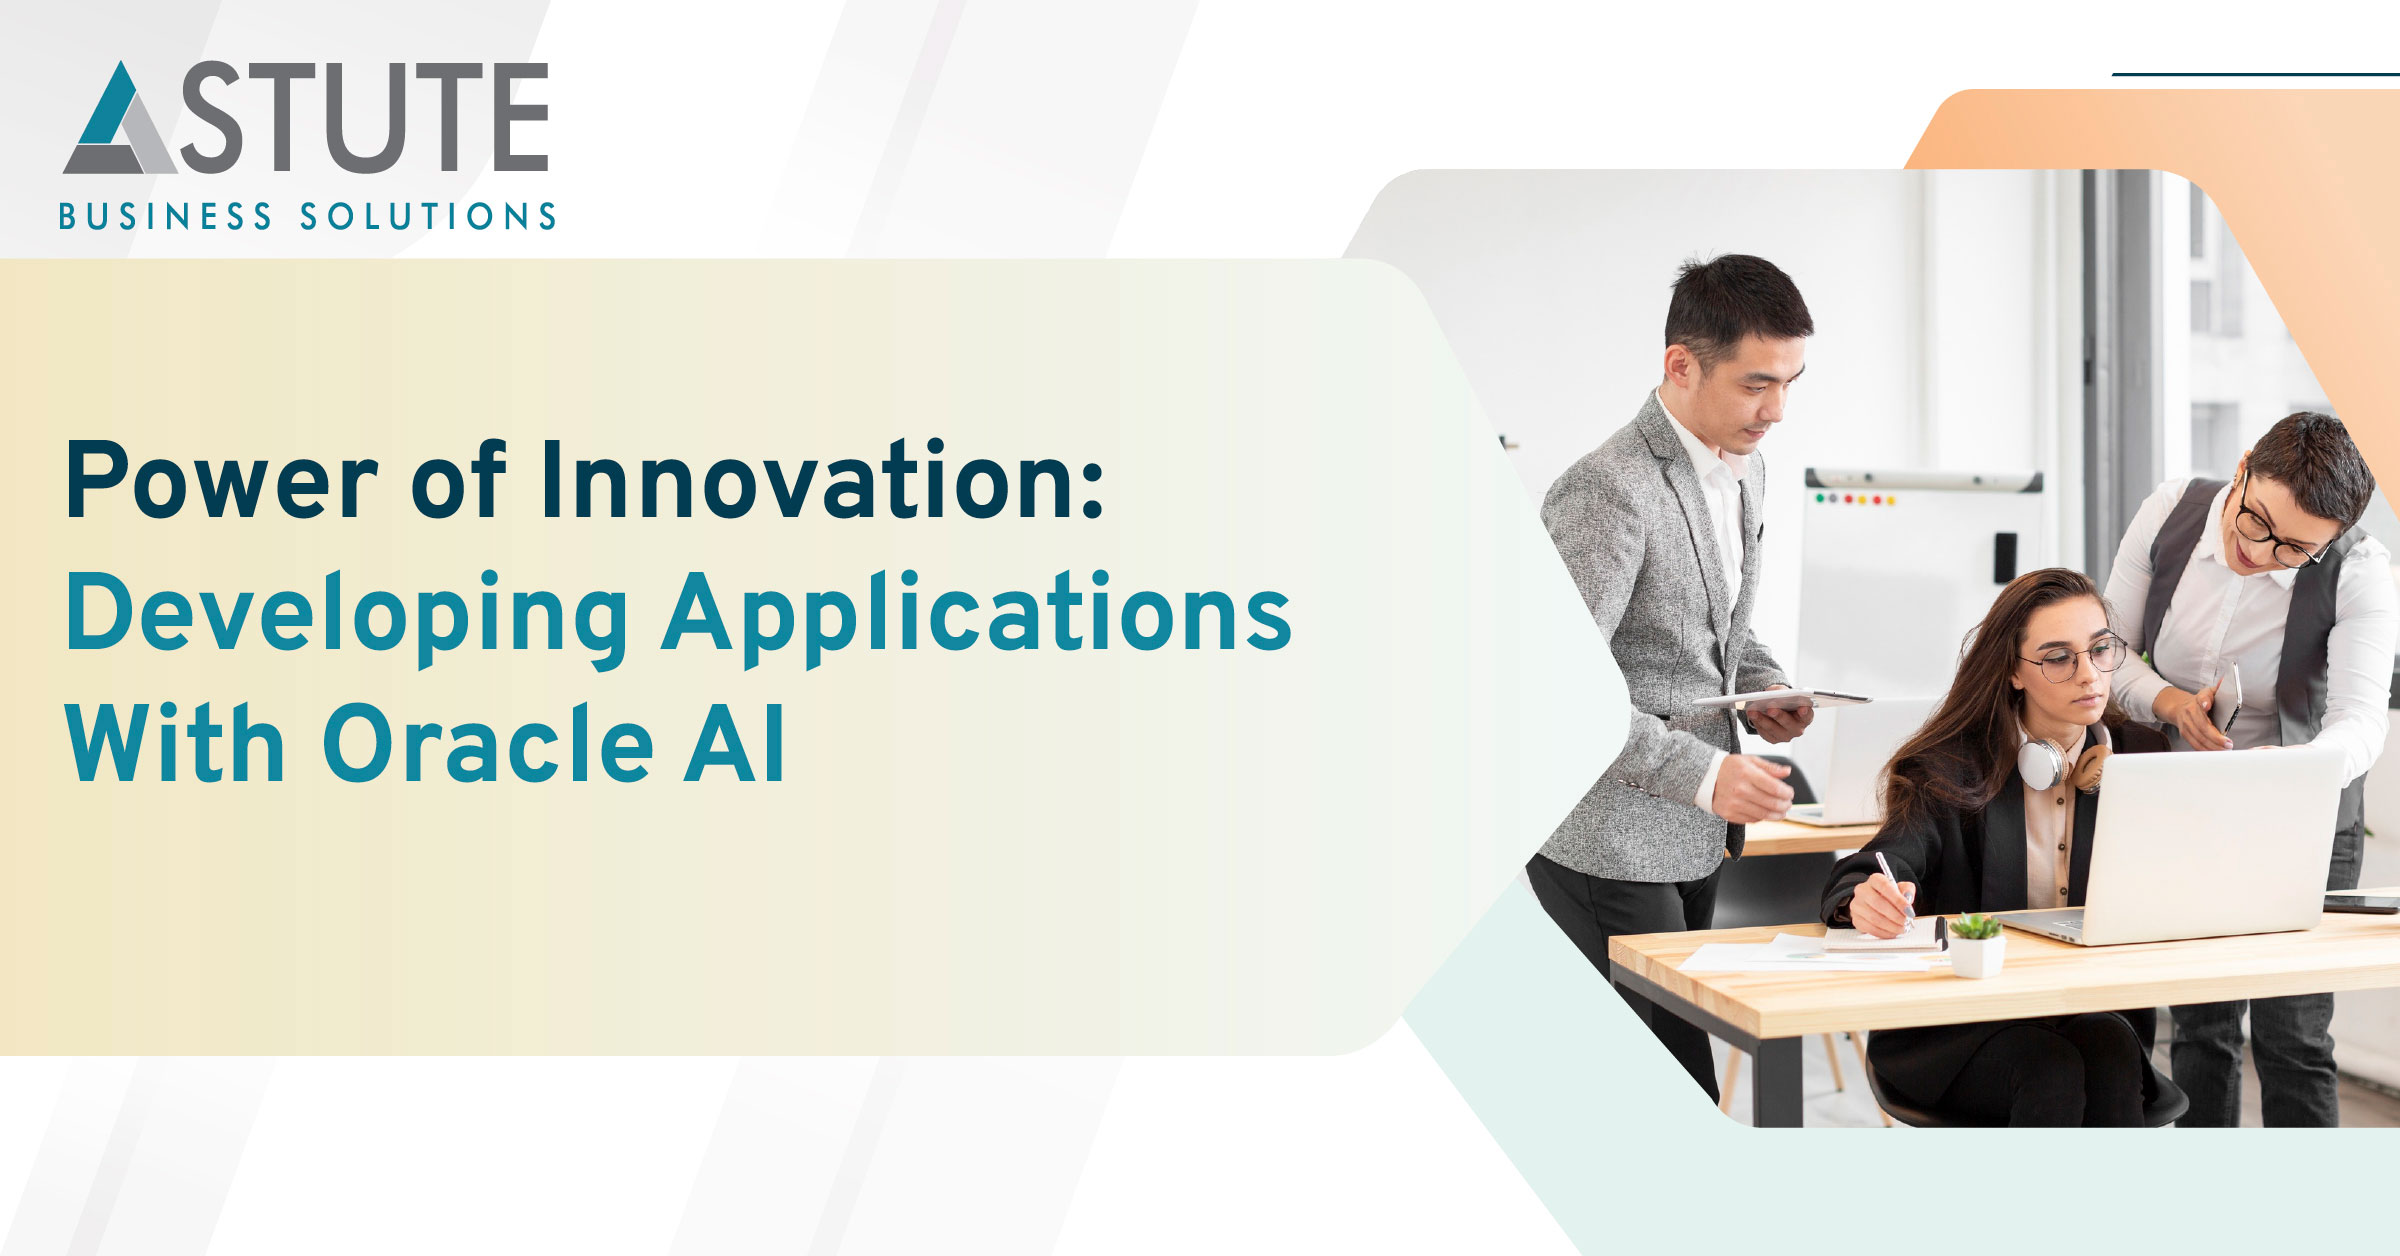 Power of Innovation: Developing Applications With Oracle AI